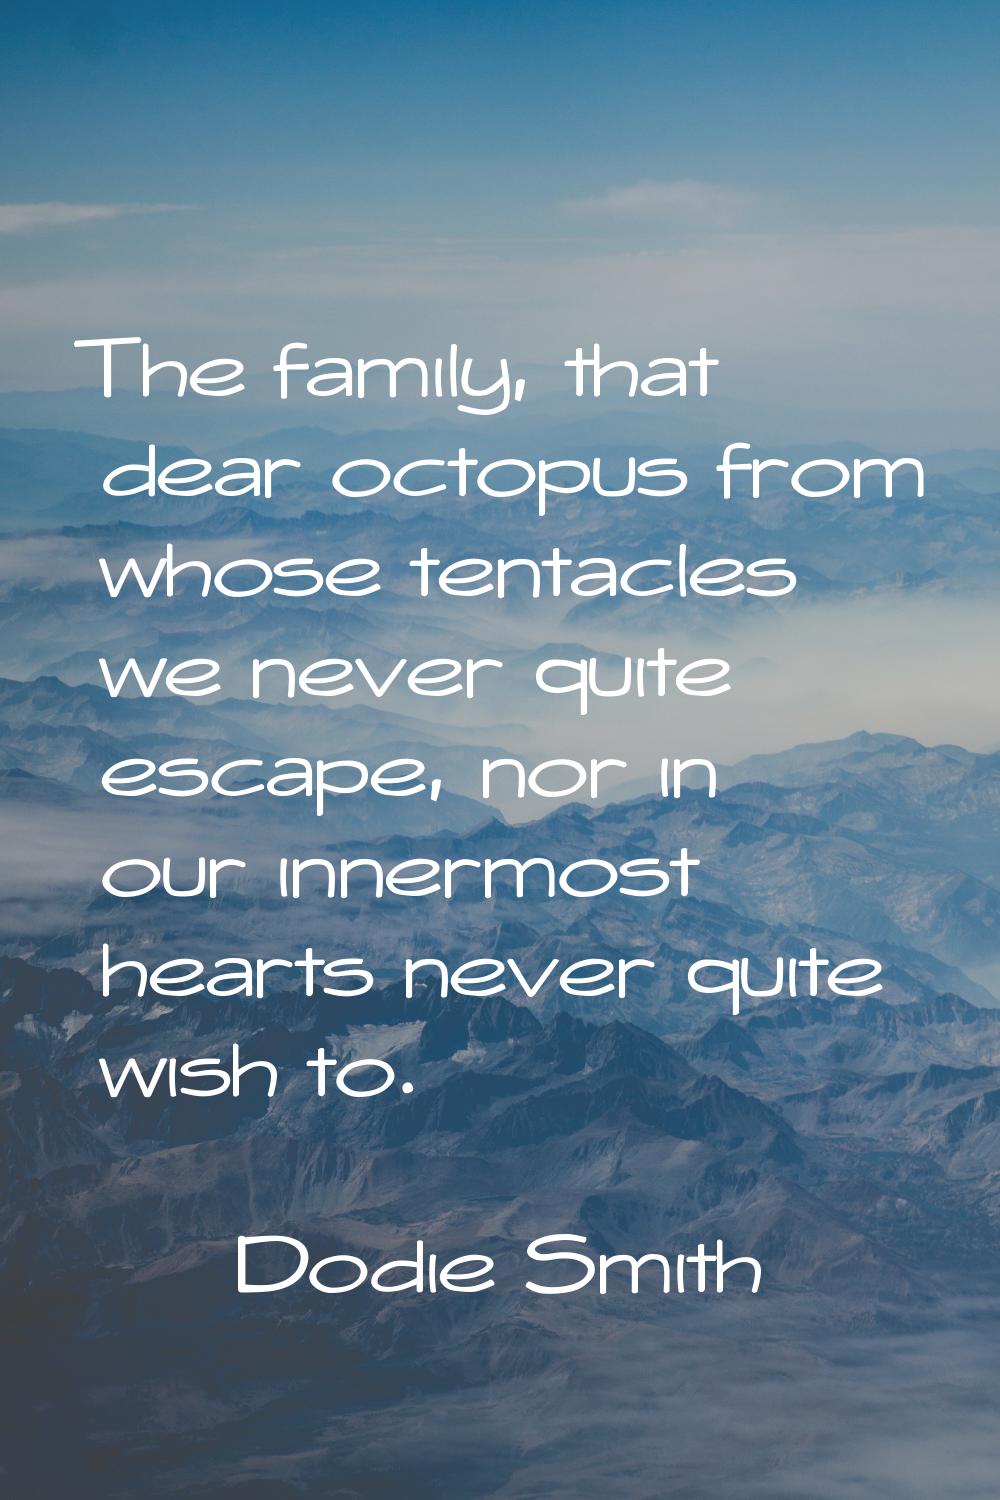 The family, that dear octopus from whose tentacles we never quite escape, nor in our innermost hear